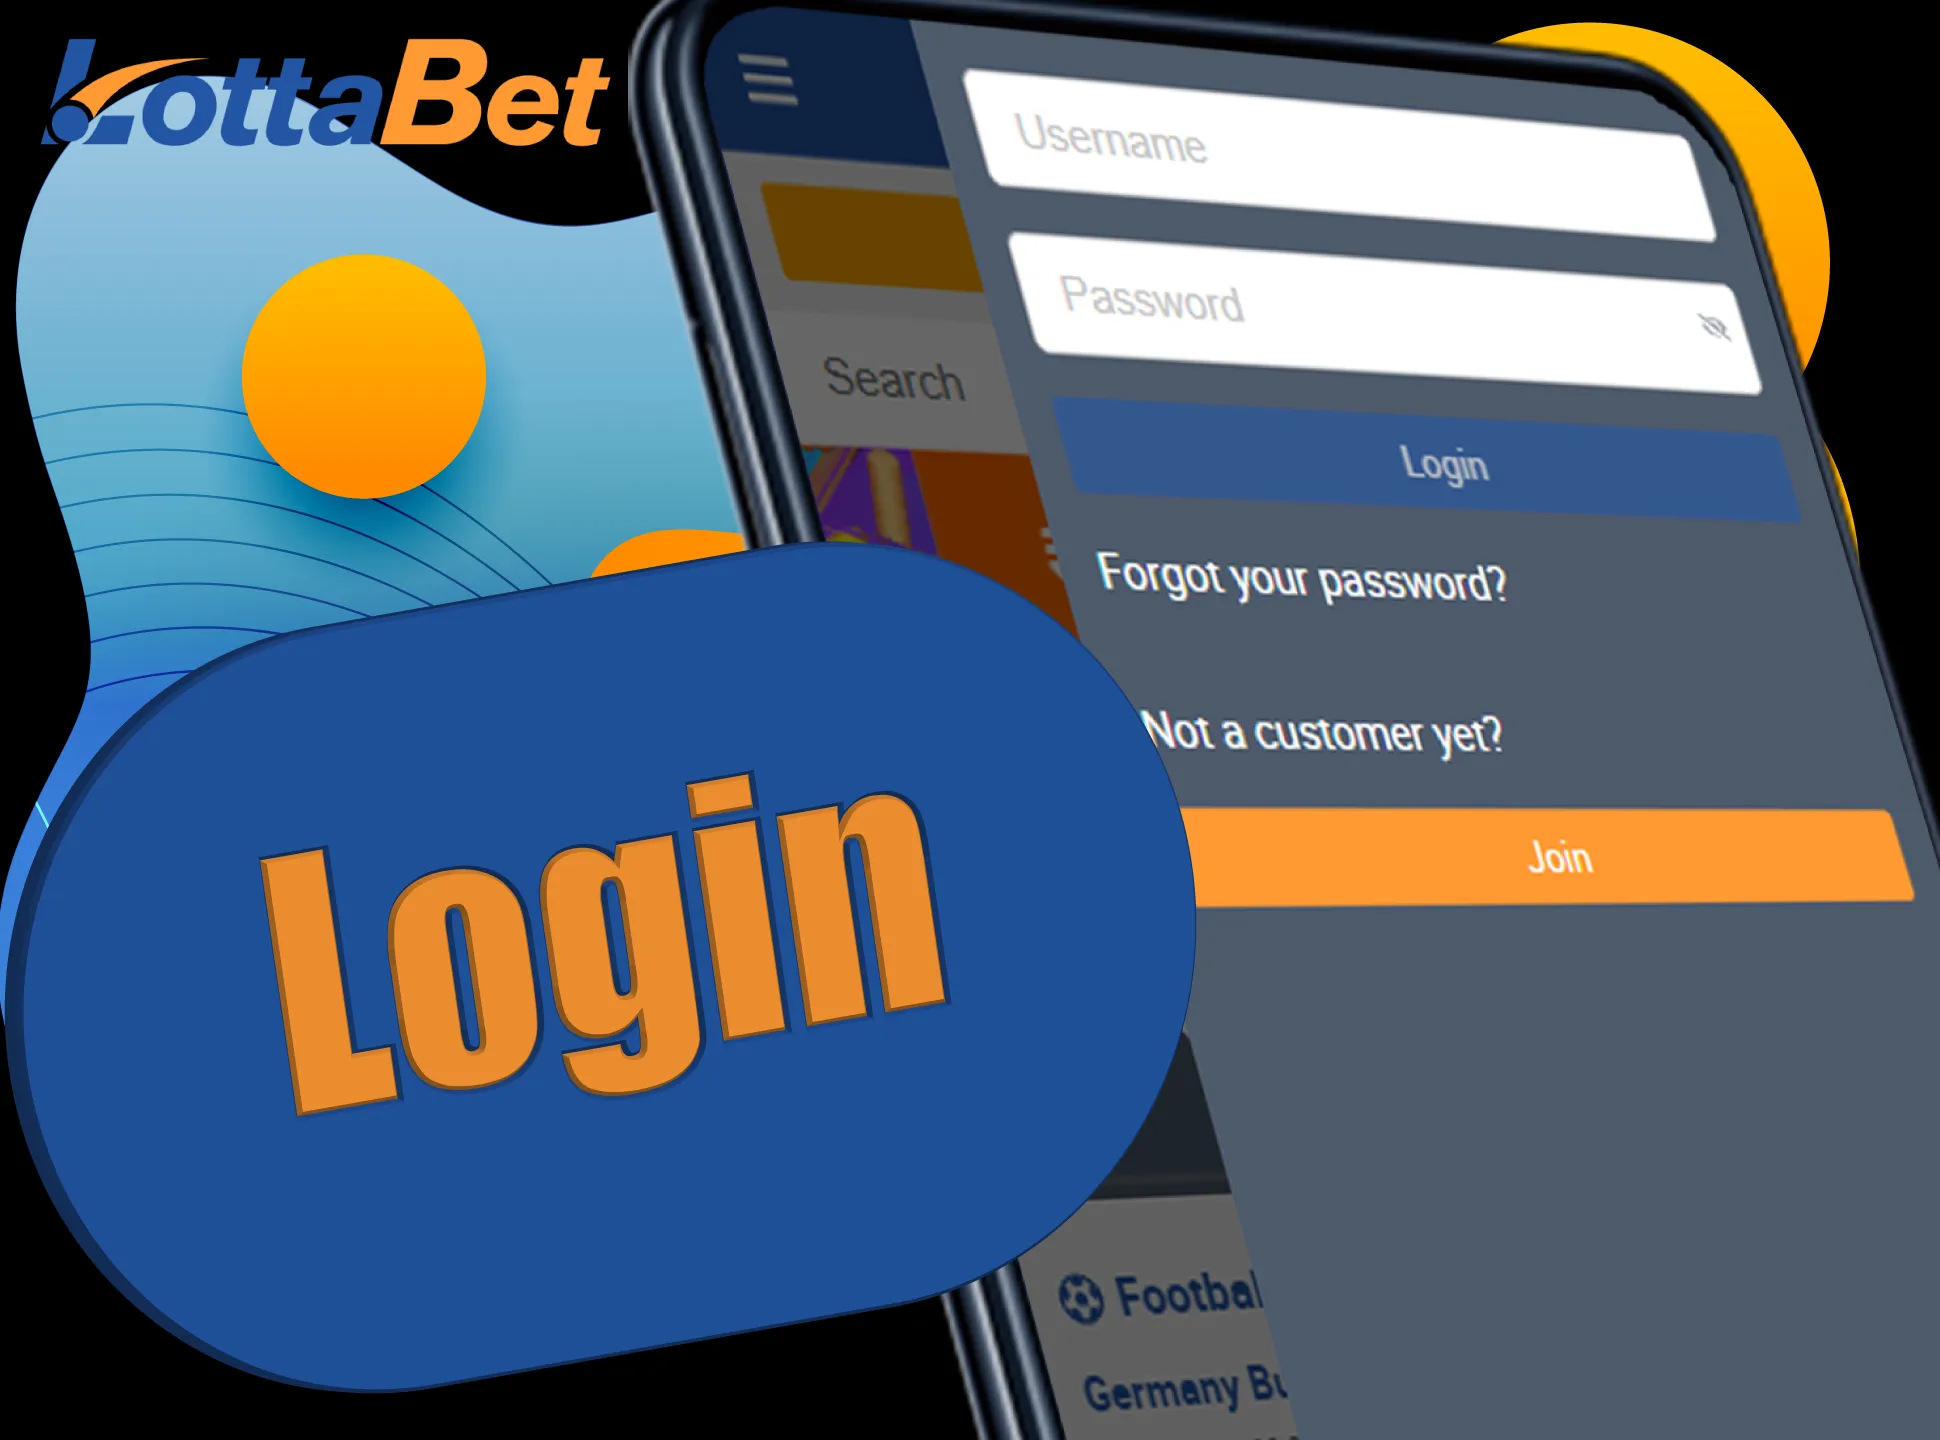 Use your username and password to log in to Lottbaet.